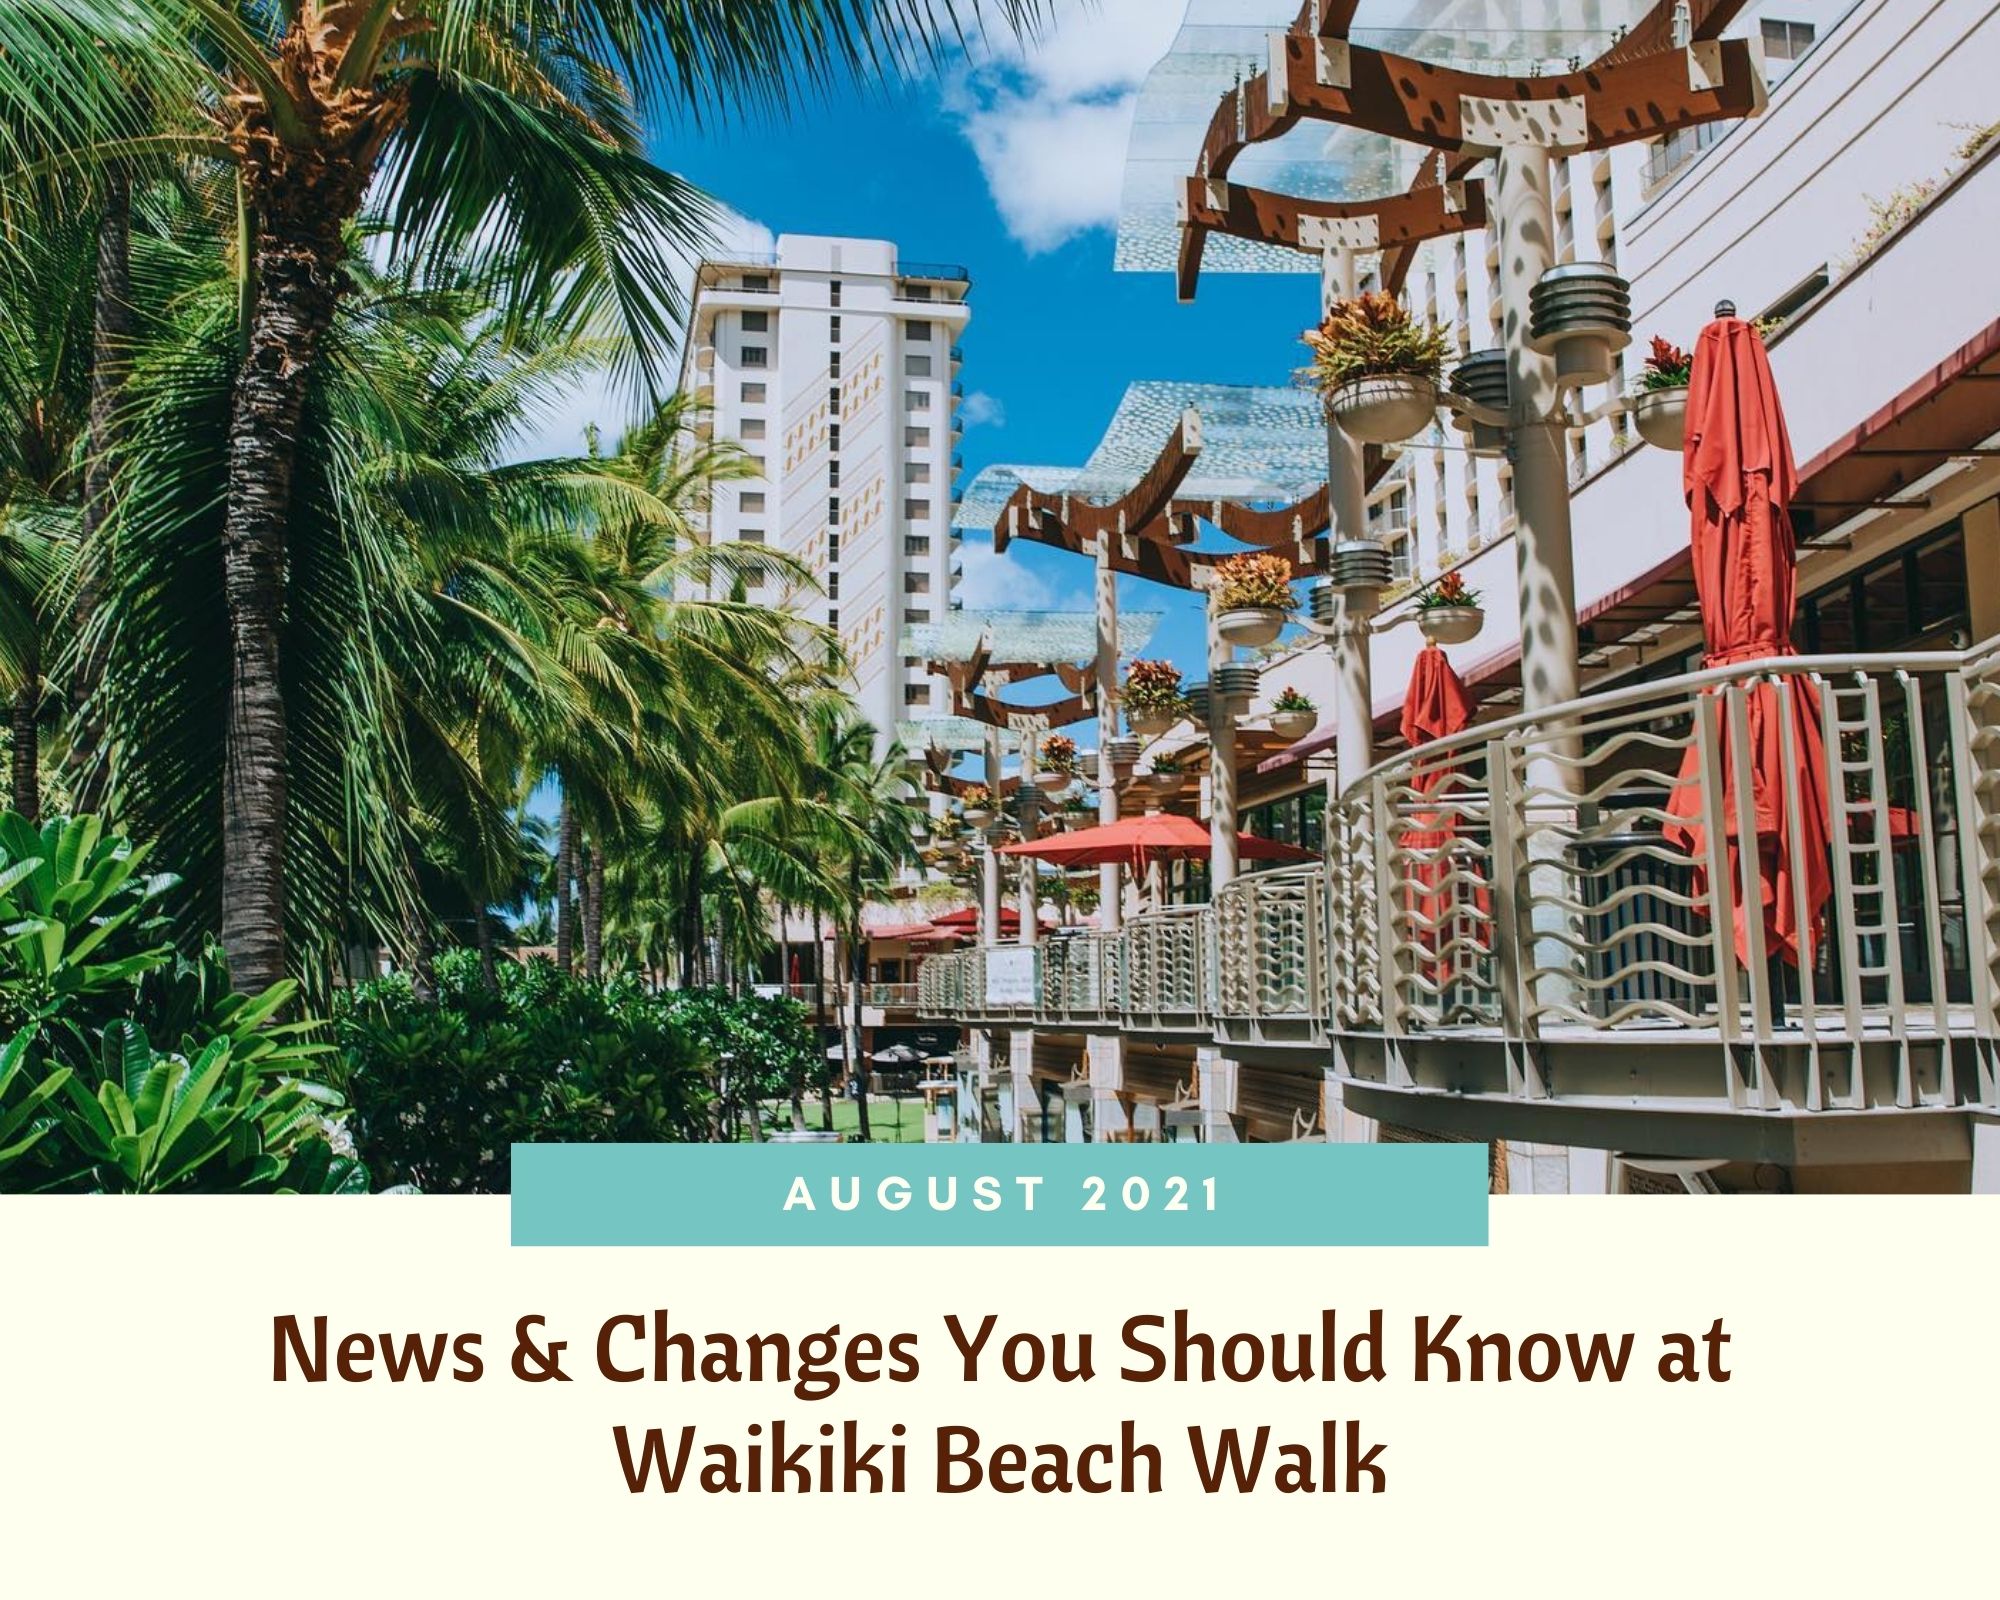 August 2021: News & Changes You Should Know at Waikiki Beach Walk